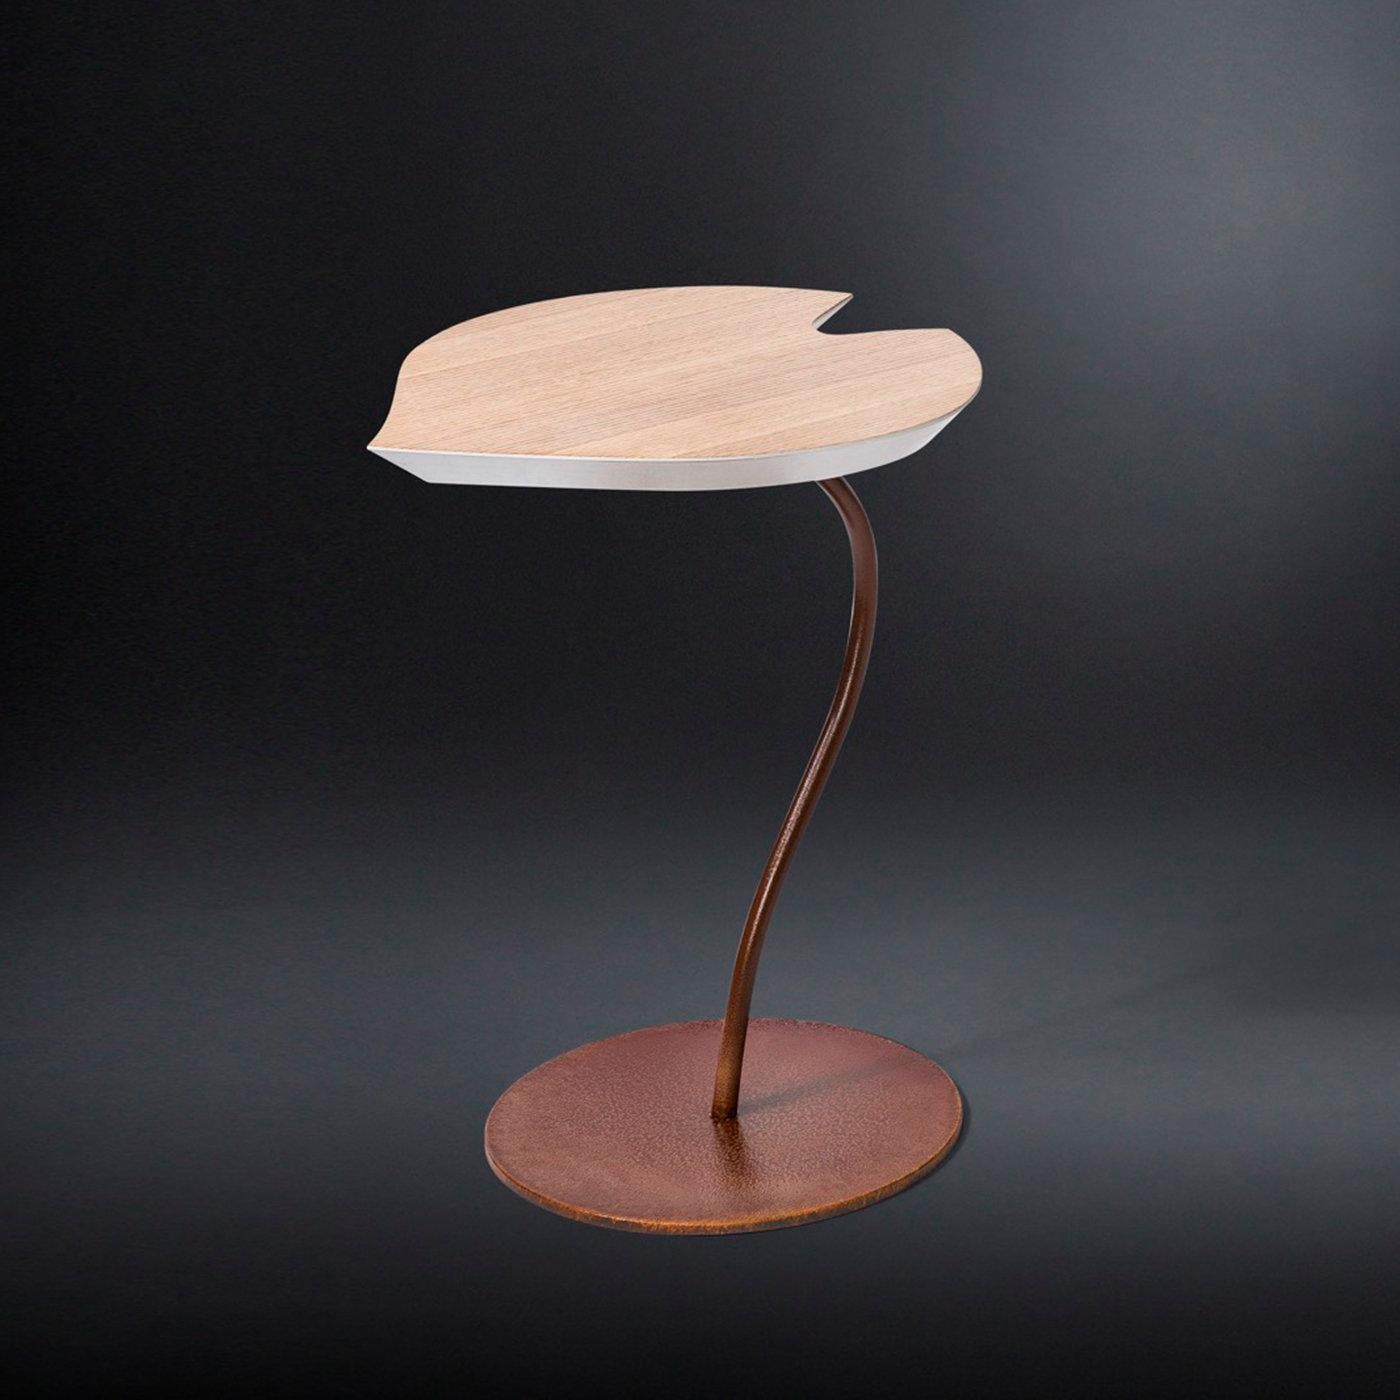 Poetically interpreting the simple elegance of nature, this side table is a delicate addition to both modern and classic interiors. Its top is shaped like a leaf and crafted of MDF with a white oak finish. The support is a curved iron rod stemming